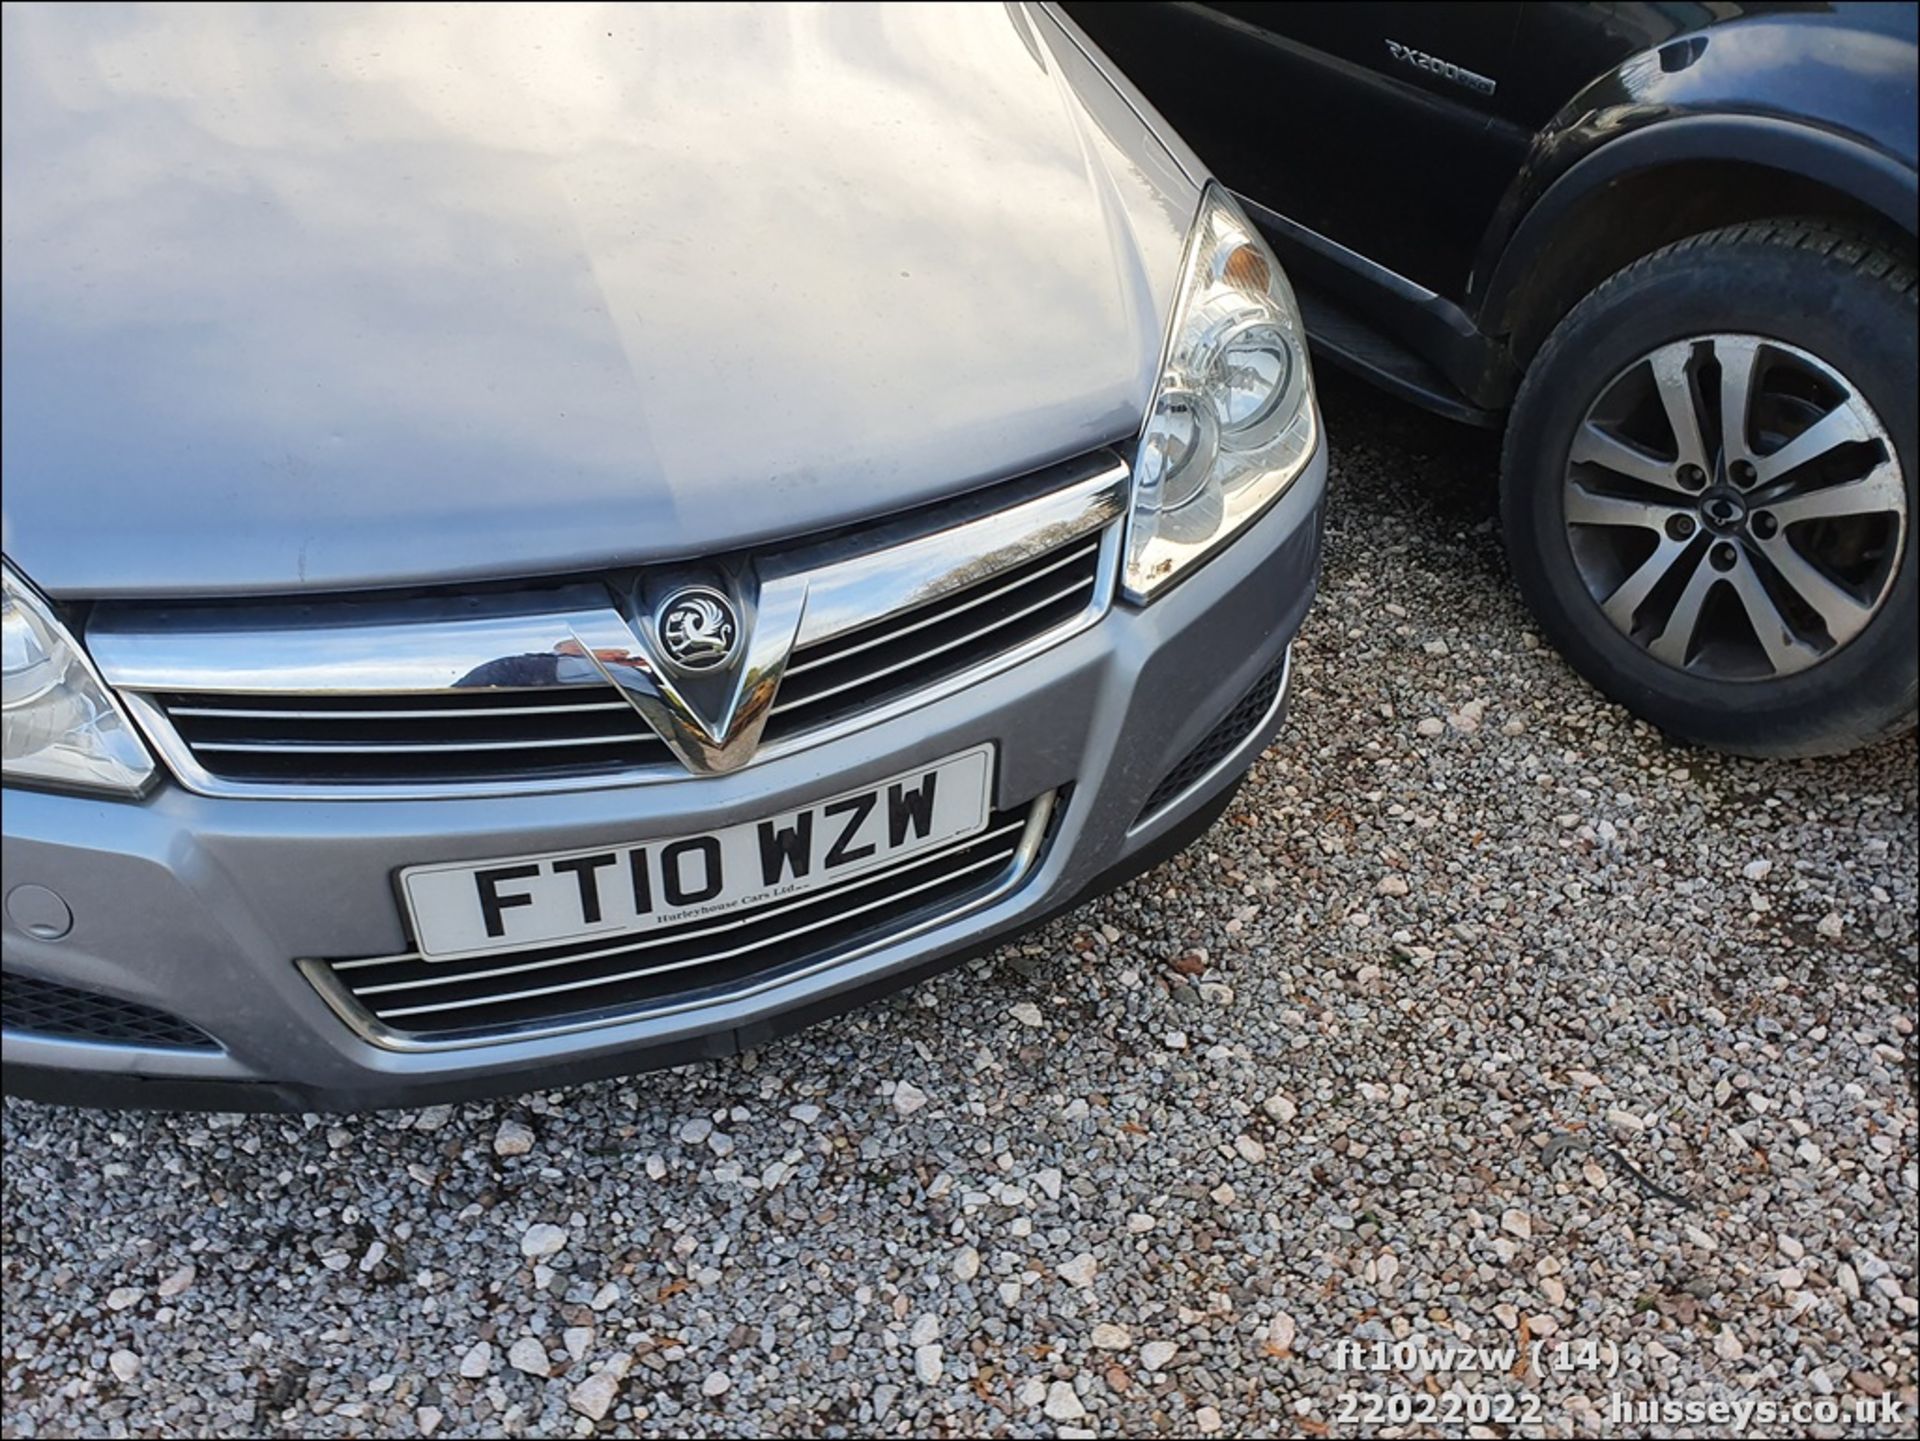 10/10 VAUXHALL ASTRA CLUB - 1364cc 5dr Hatchback (Silver) - Image 15 of 29